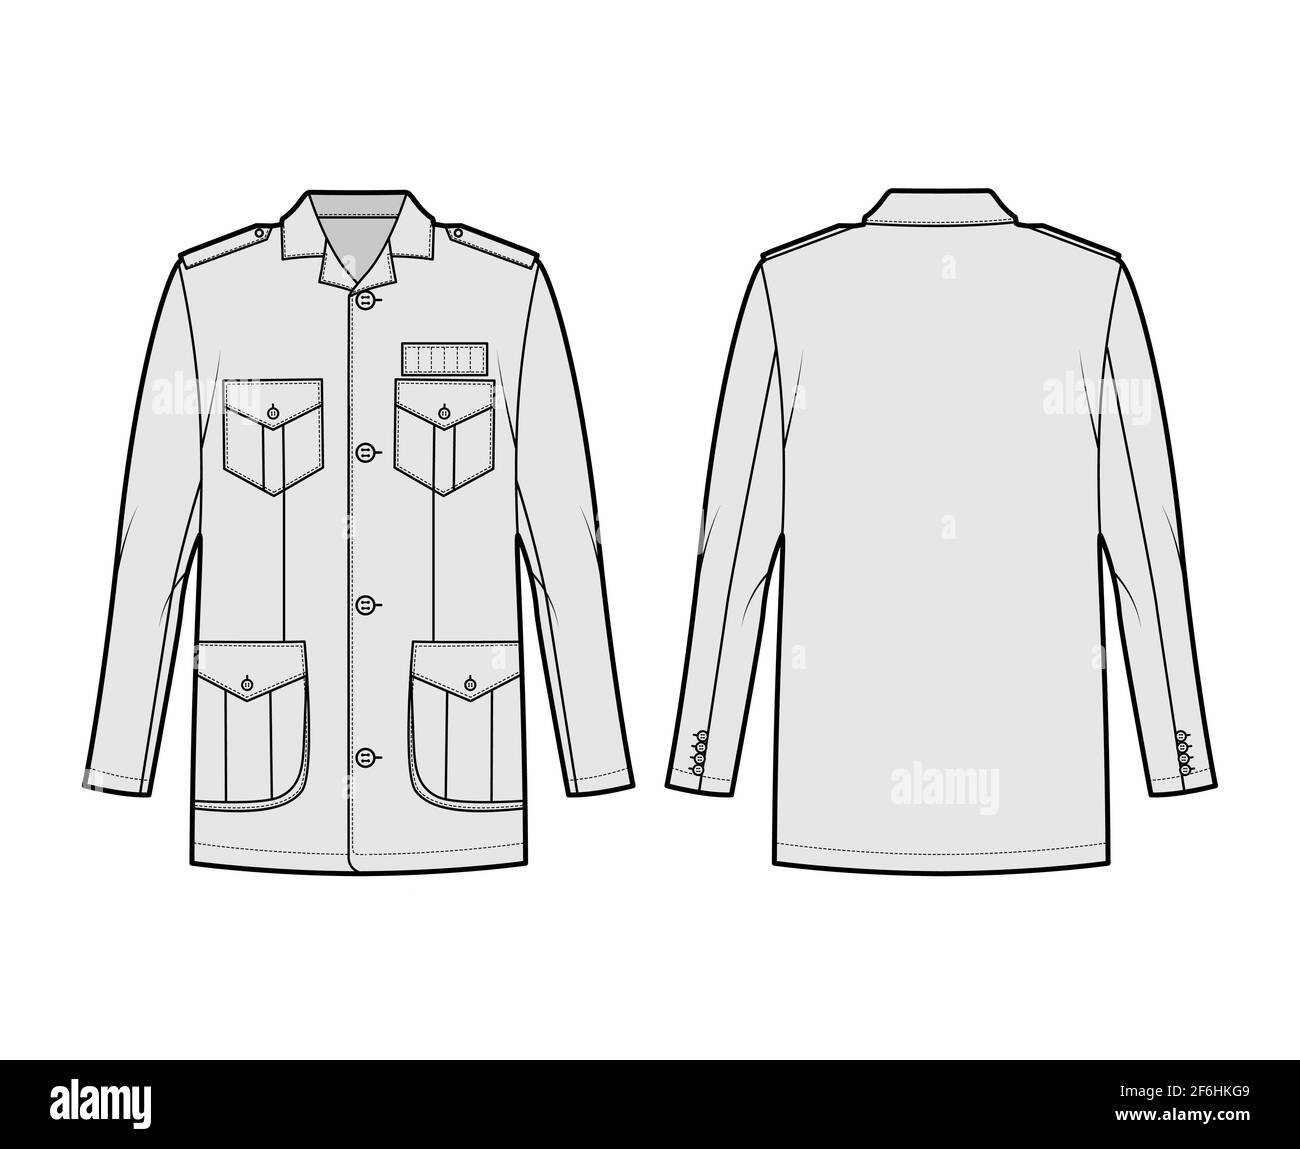 Safari jacket technical fashion illustration with oversized, long sleeve, flap pockets, button fastening, epaulettes. Flat coat template front, back, grey color style. Women men unisex top CAD mockup Stock Vector